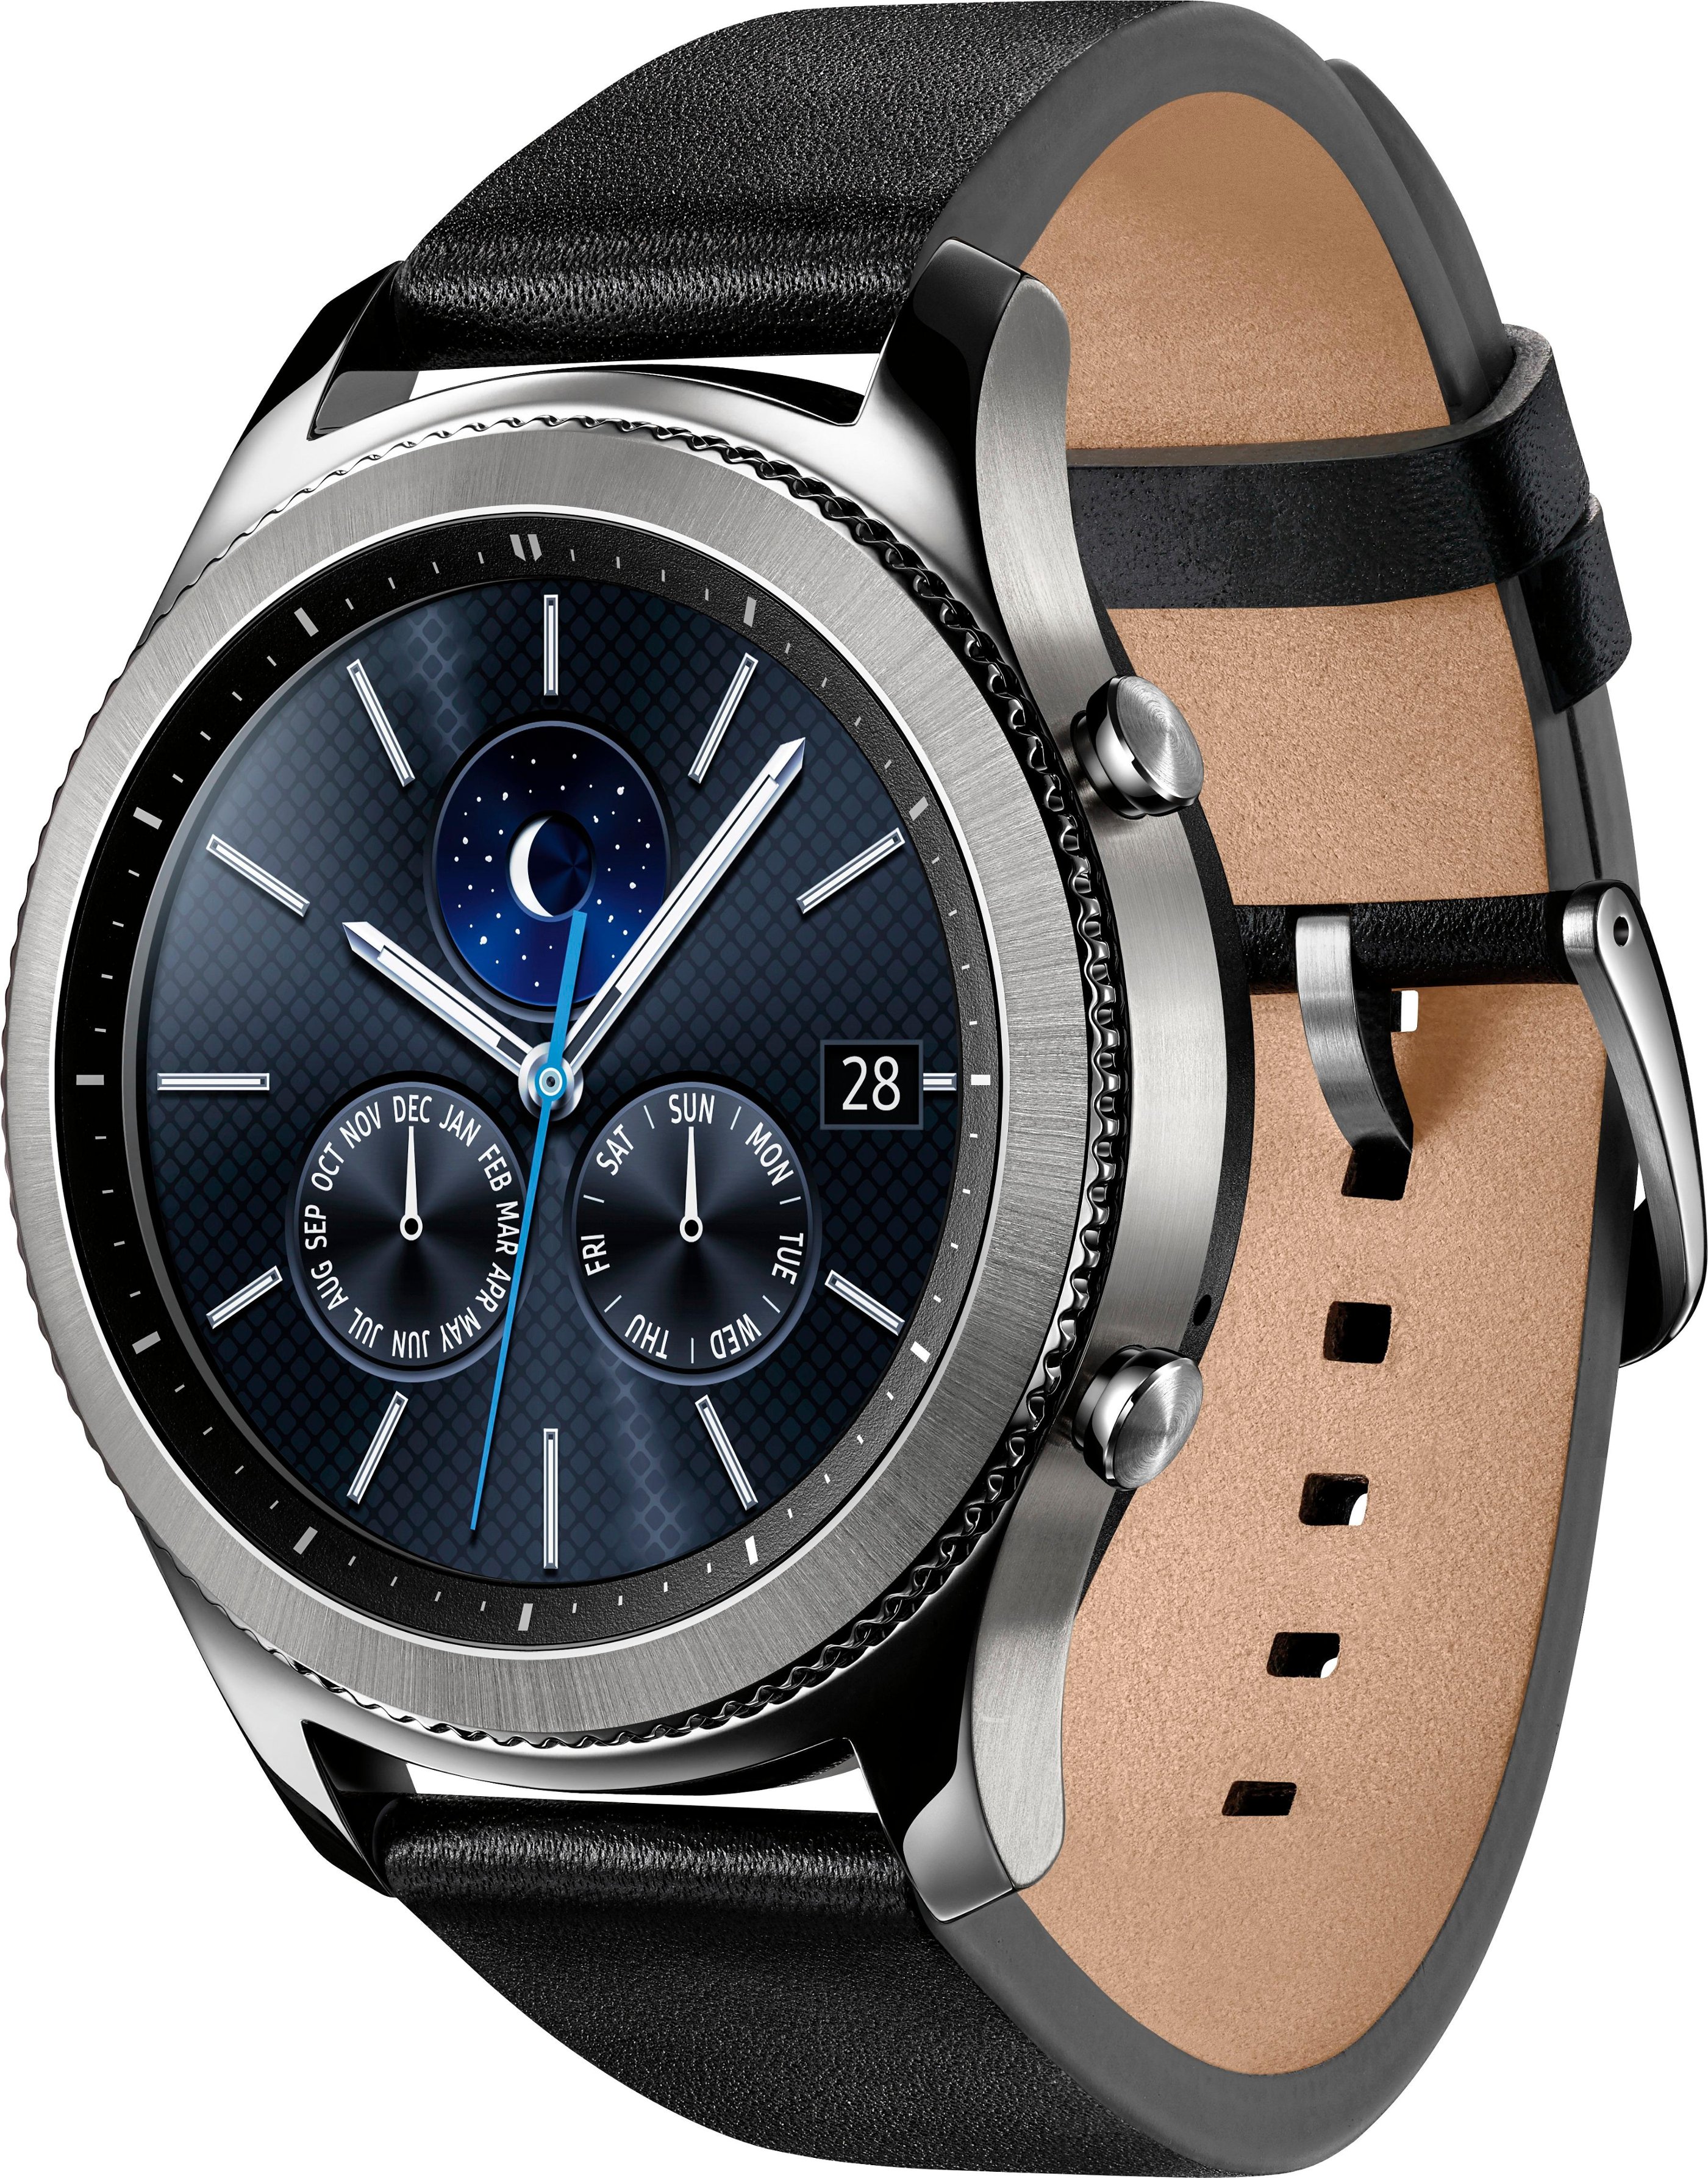 Angle View: Samsung - Geek Squad Certified Refurbished Gear S3 Classic Smartwatch 46mm Stainless Steel - Silver